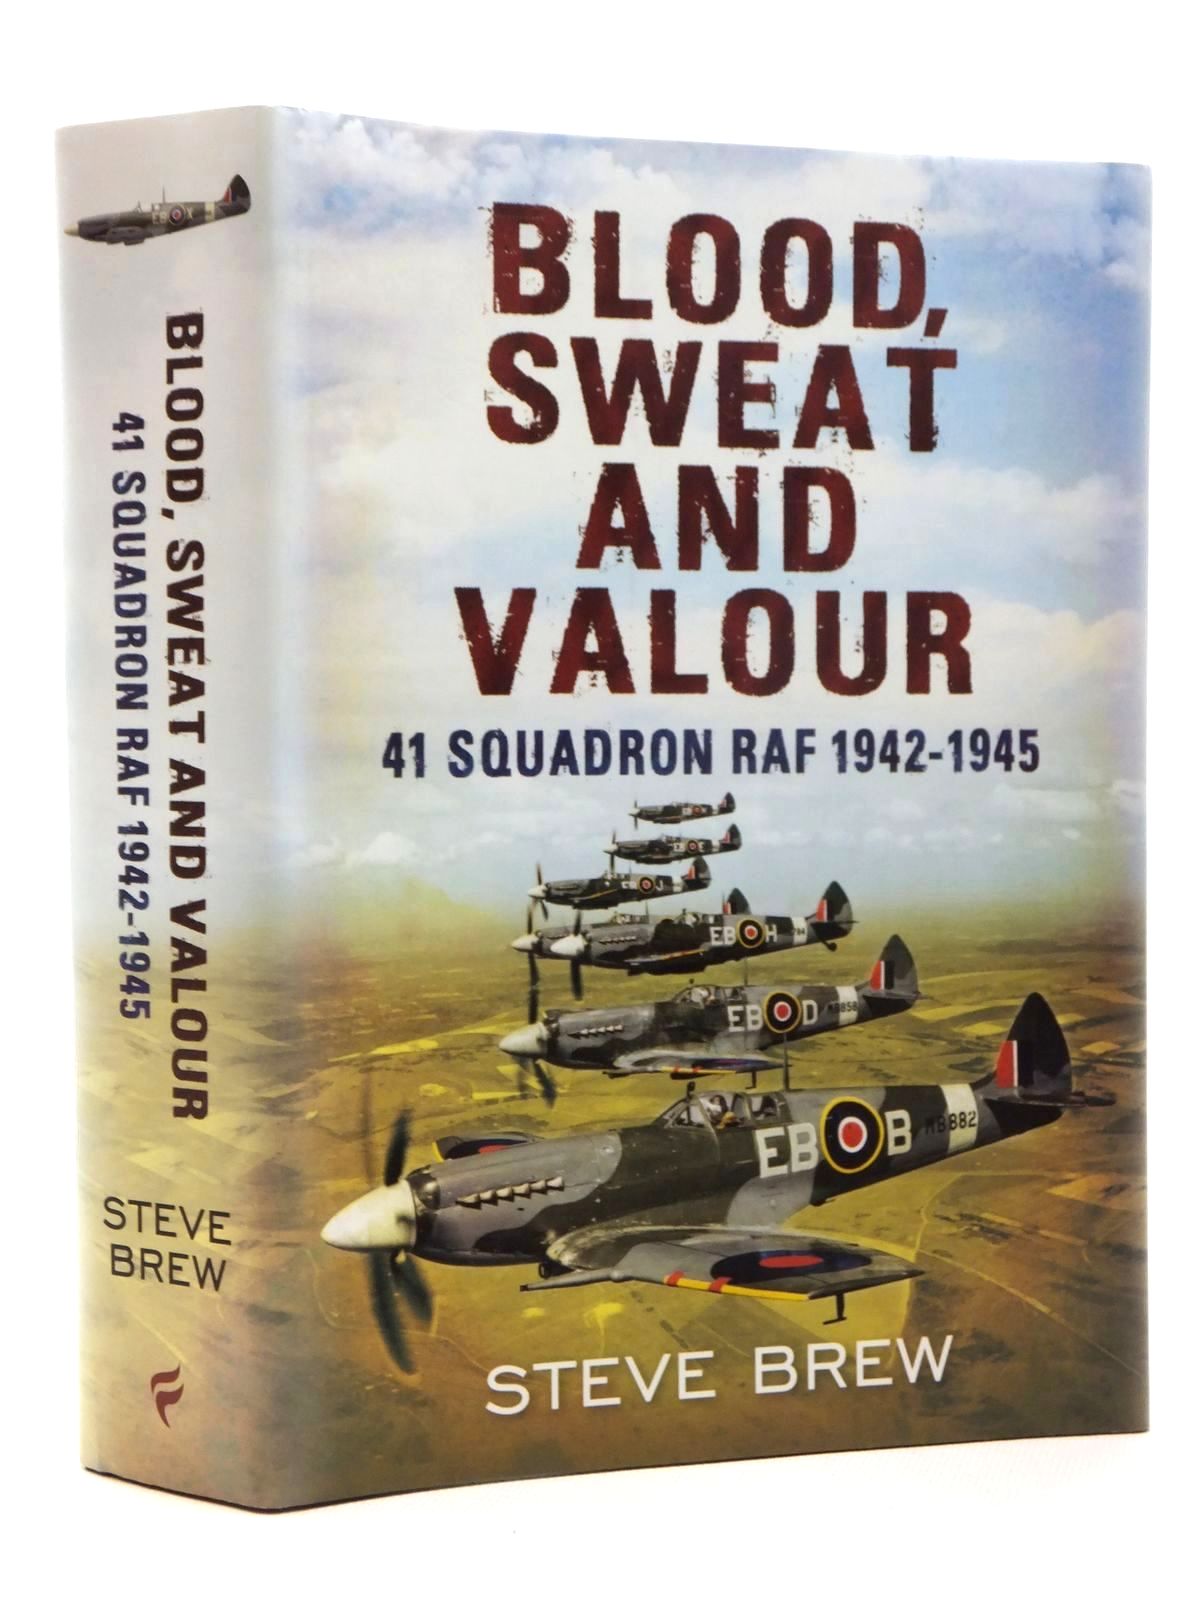 Blood, Sweat And Valour: 41 Squadron Raf 1942-1945